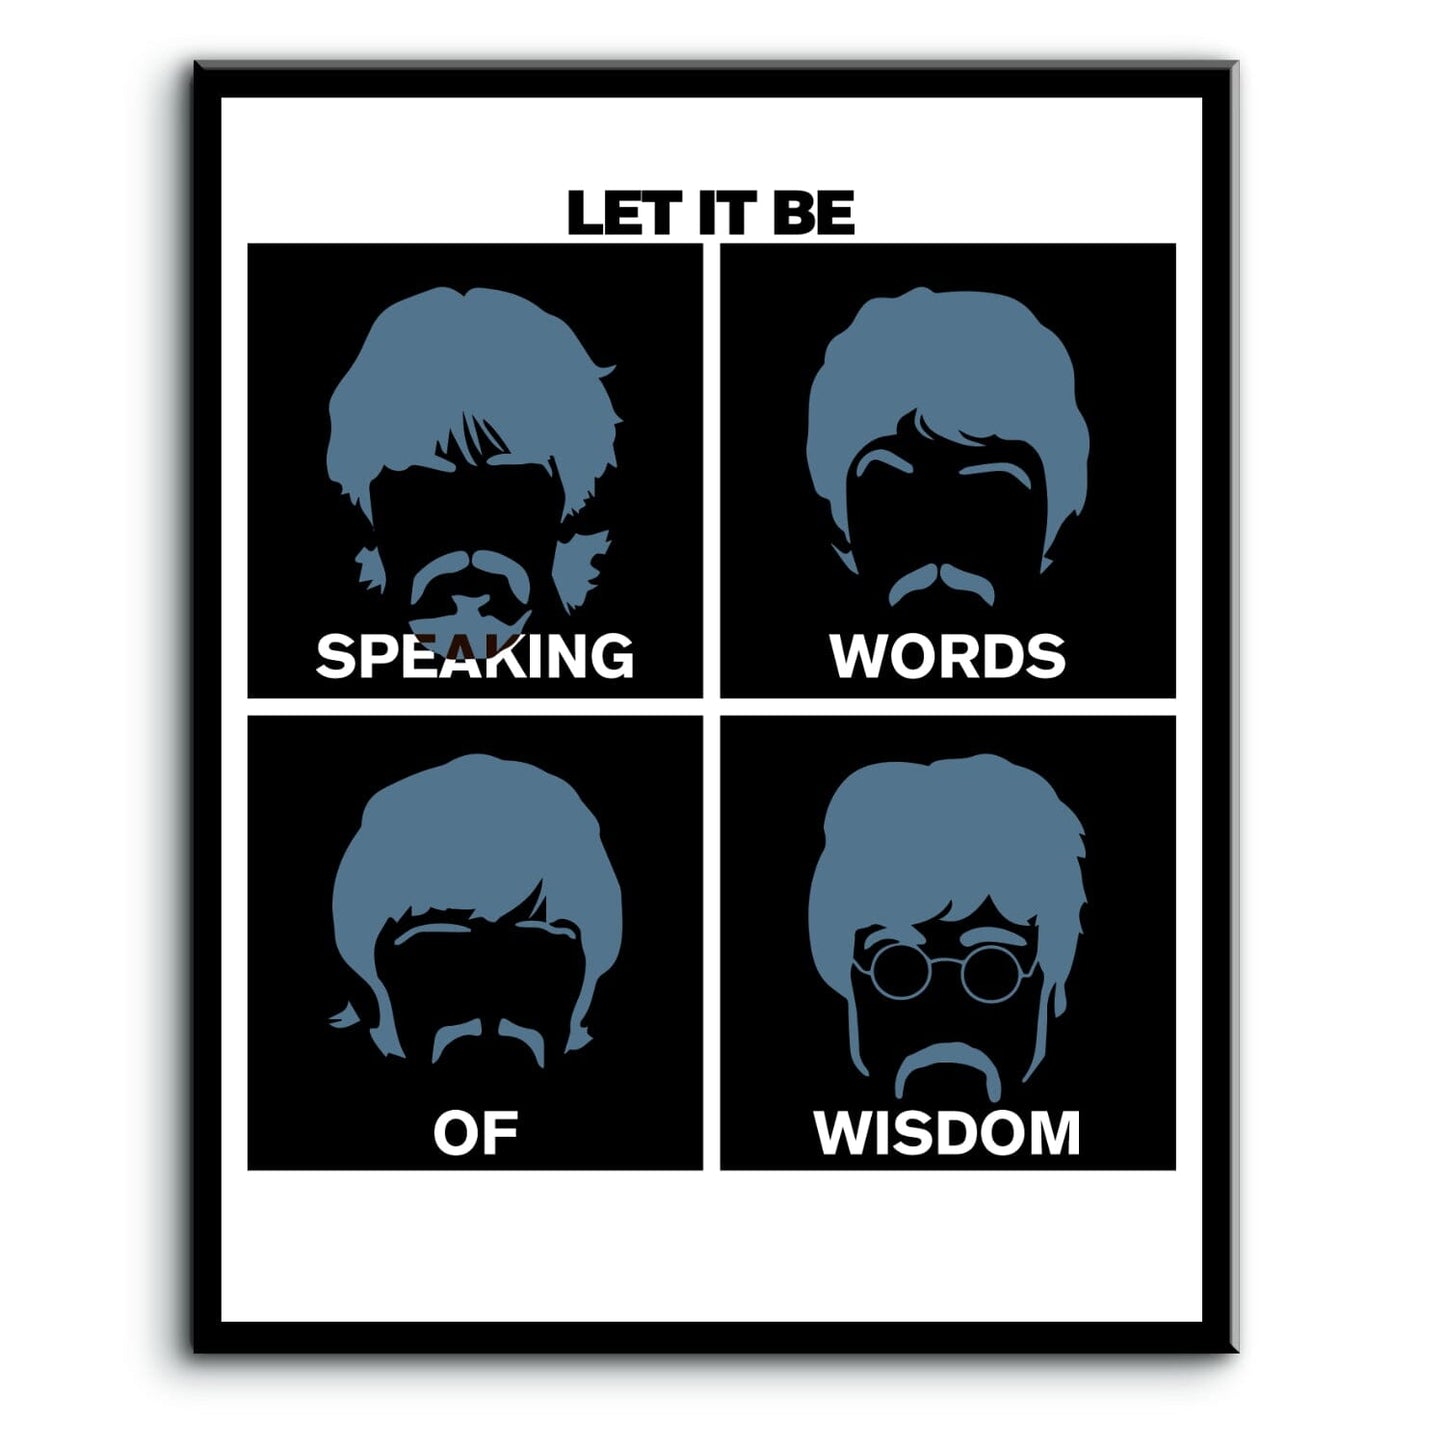 Let it Be by the Beatles - Song Lyric Inspired Wall Decor Song Lyrics Art Song Lyrics Art 8x10 Plaque Mount 